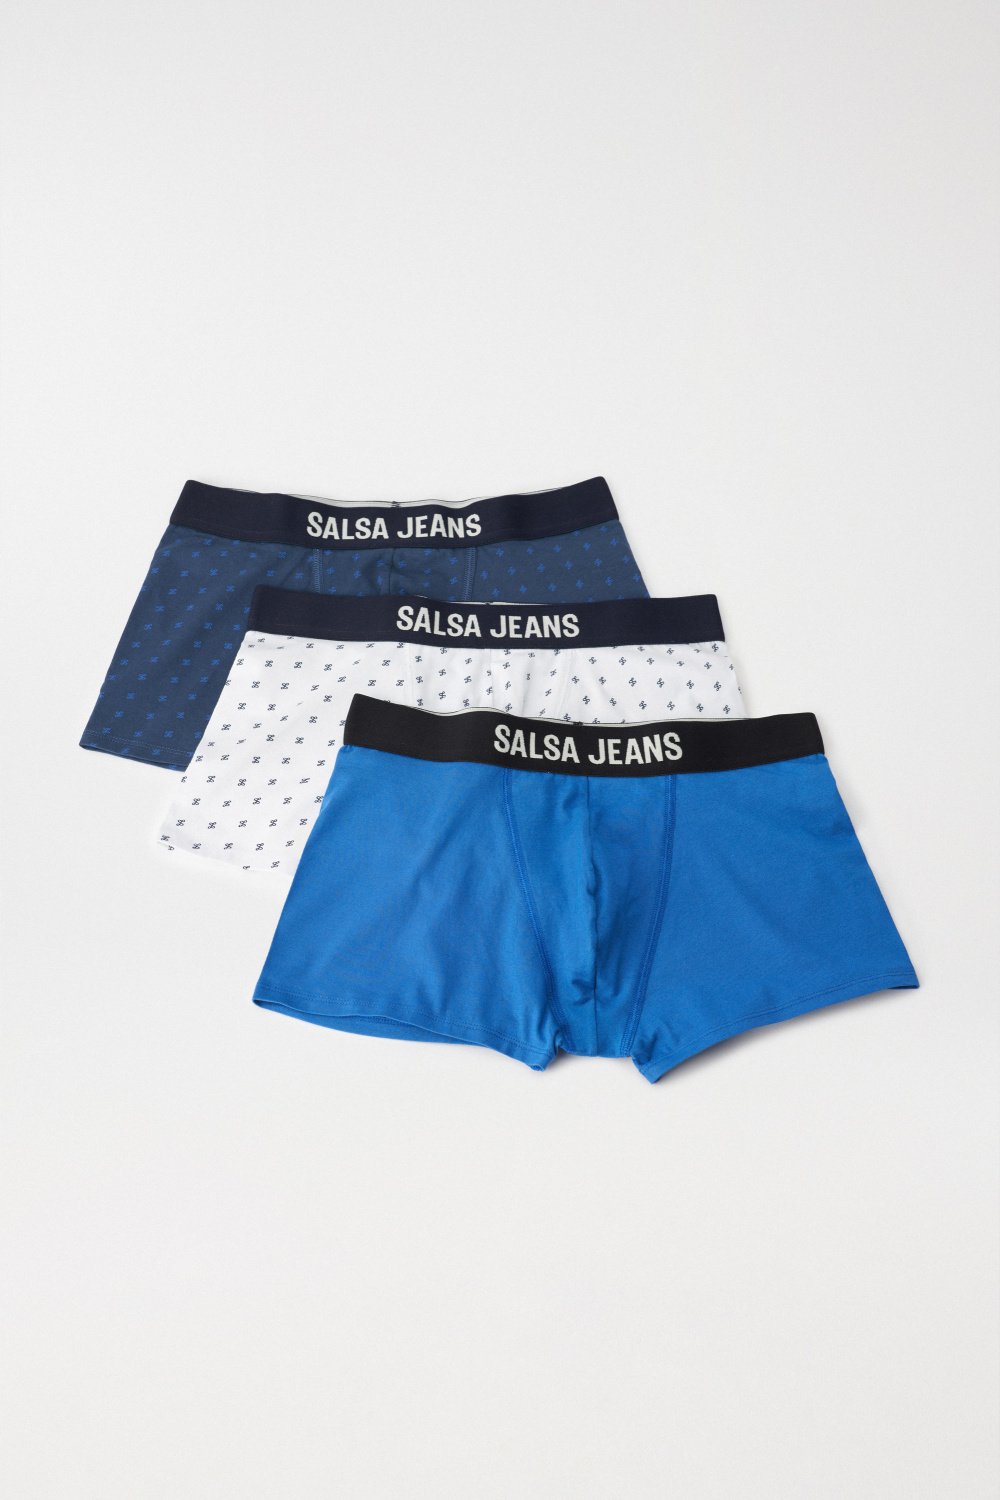 PACK OF 3 BOXERS - Salsa